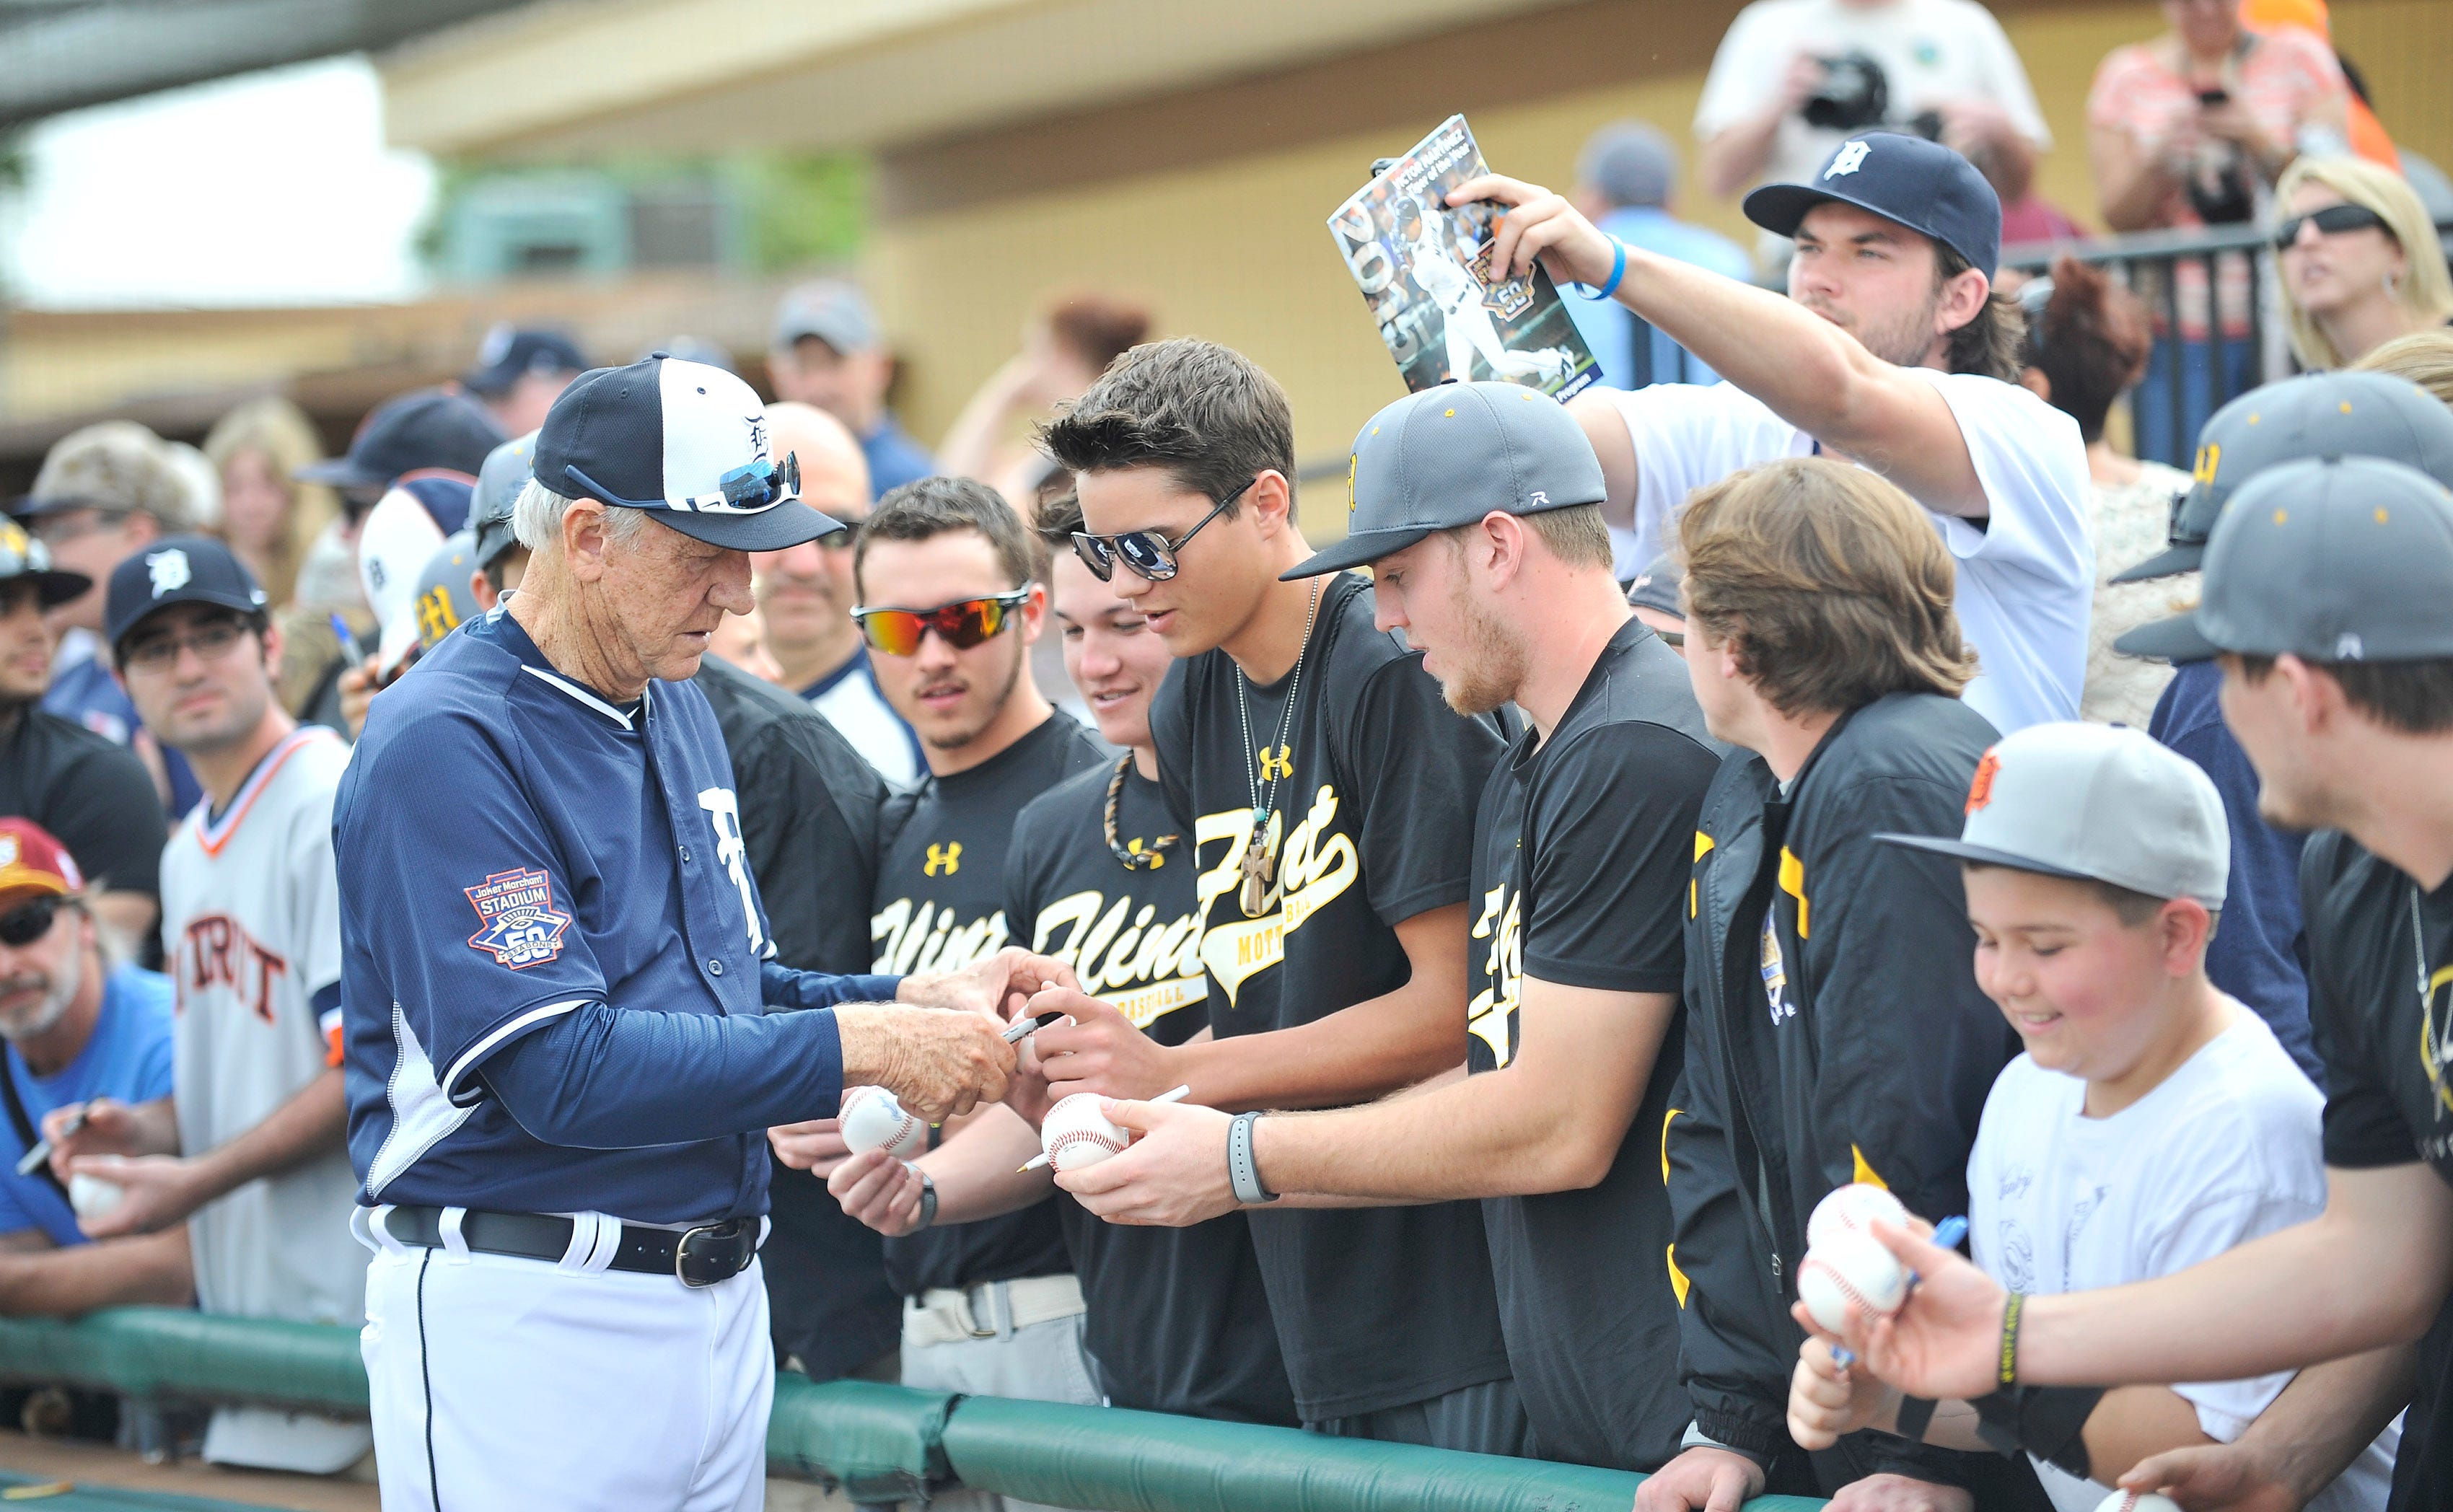 Tigers legend Al Kaline signs autographs for players from Flint Mott baseball team during batting practice before a game against the Toronto Blue Jays at Joker Marchant Stadium in Lakeland, Fla. on March 9, 2015.